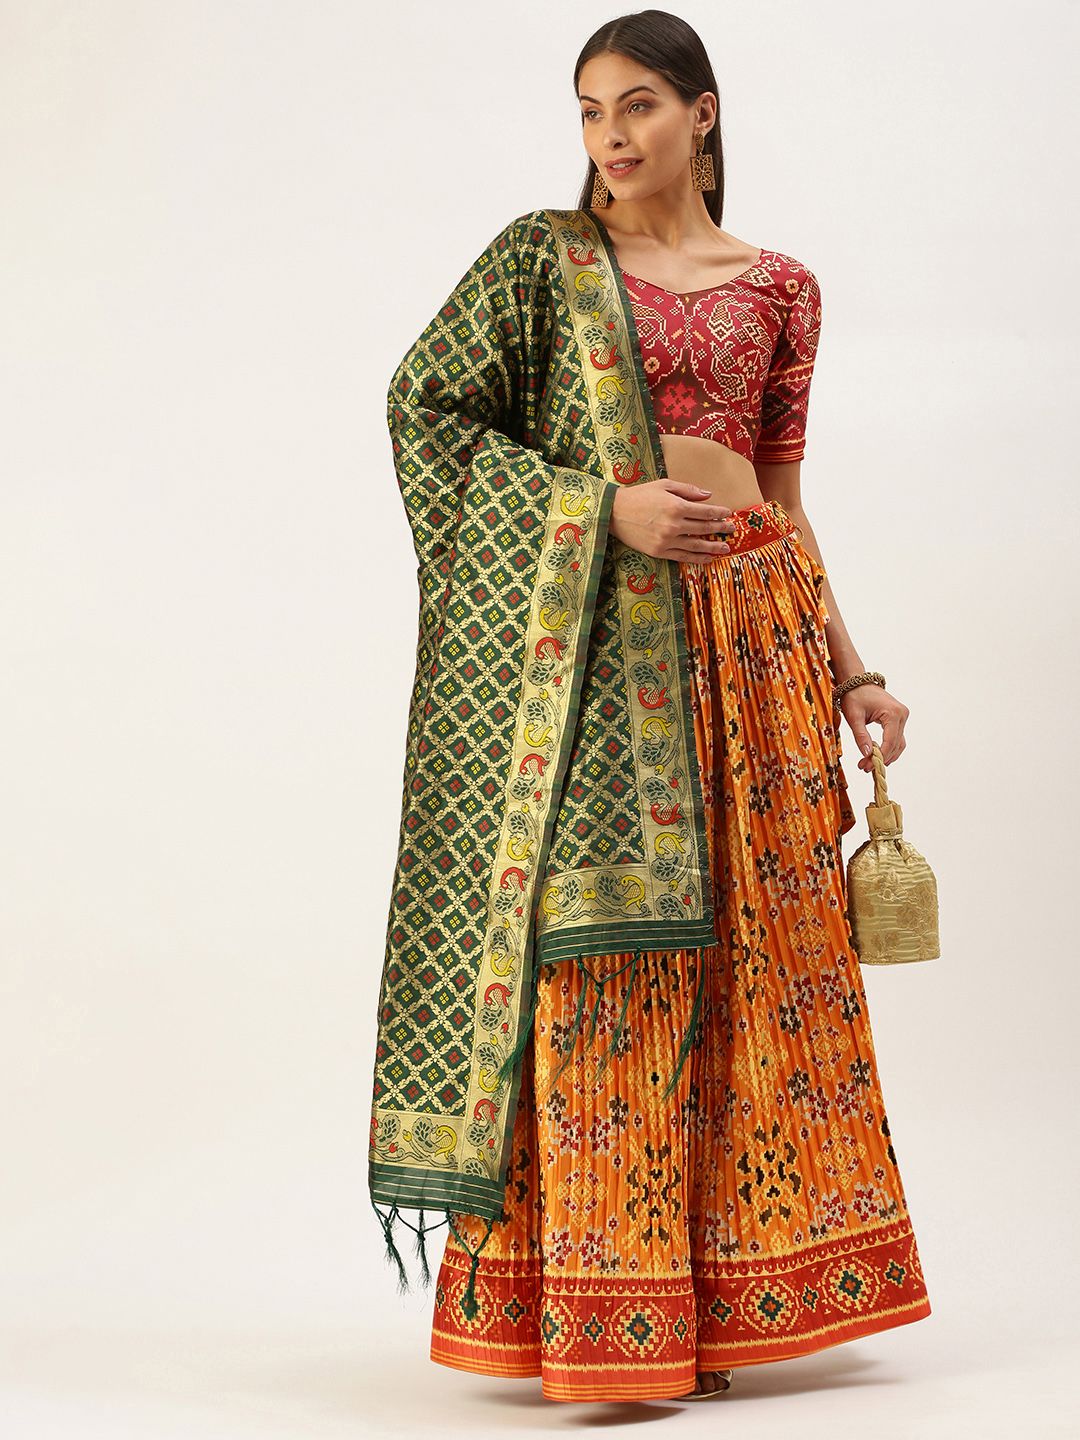 LOOKNBOOK ART Orange & Red Printed Semi-Stitched Lehenga & Unstitched Blouse With Dupatta Price in India